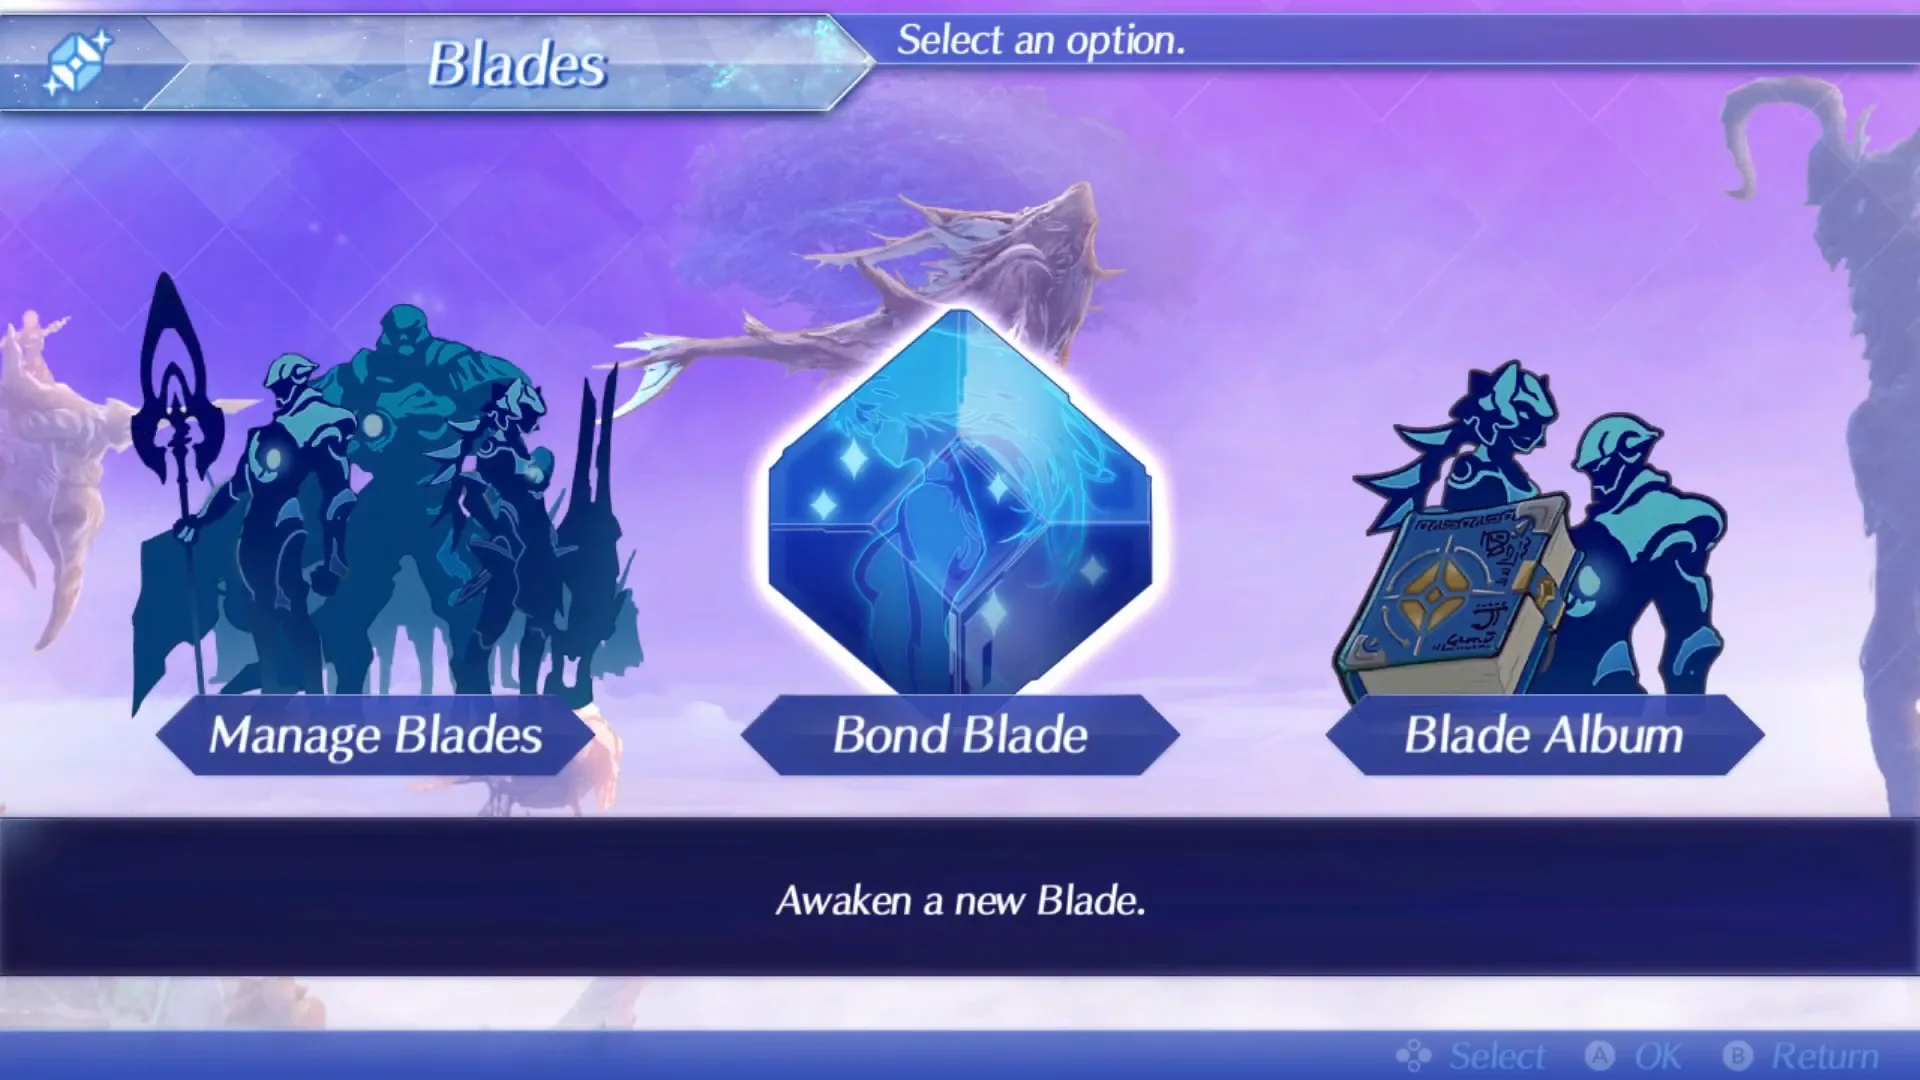 Awaken a new Blade with Divine Core Crystal